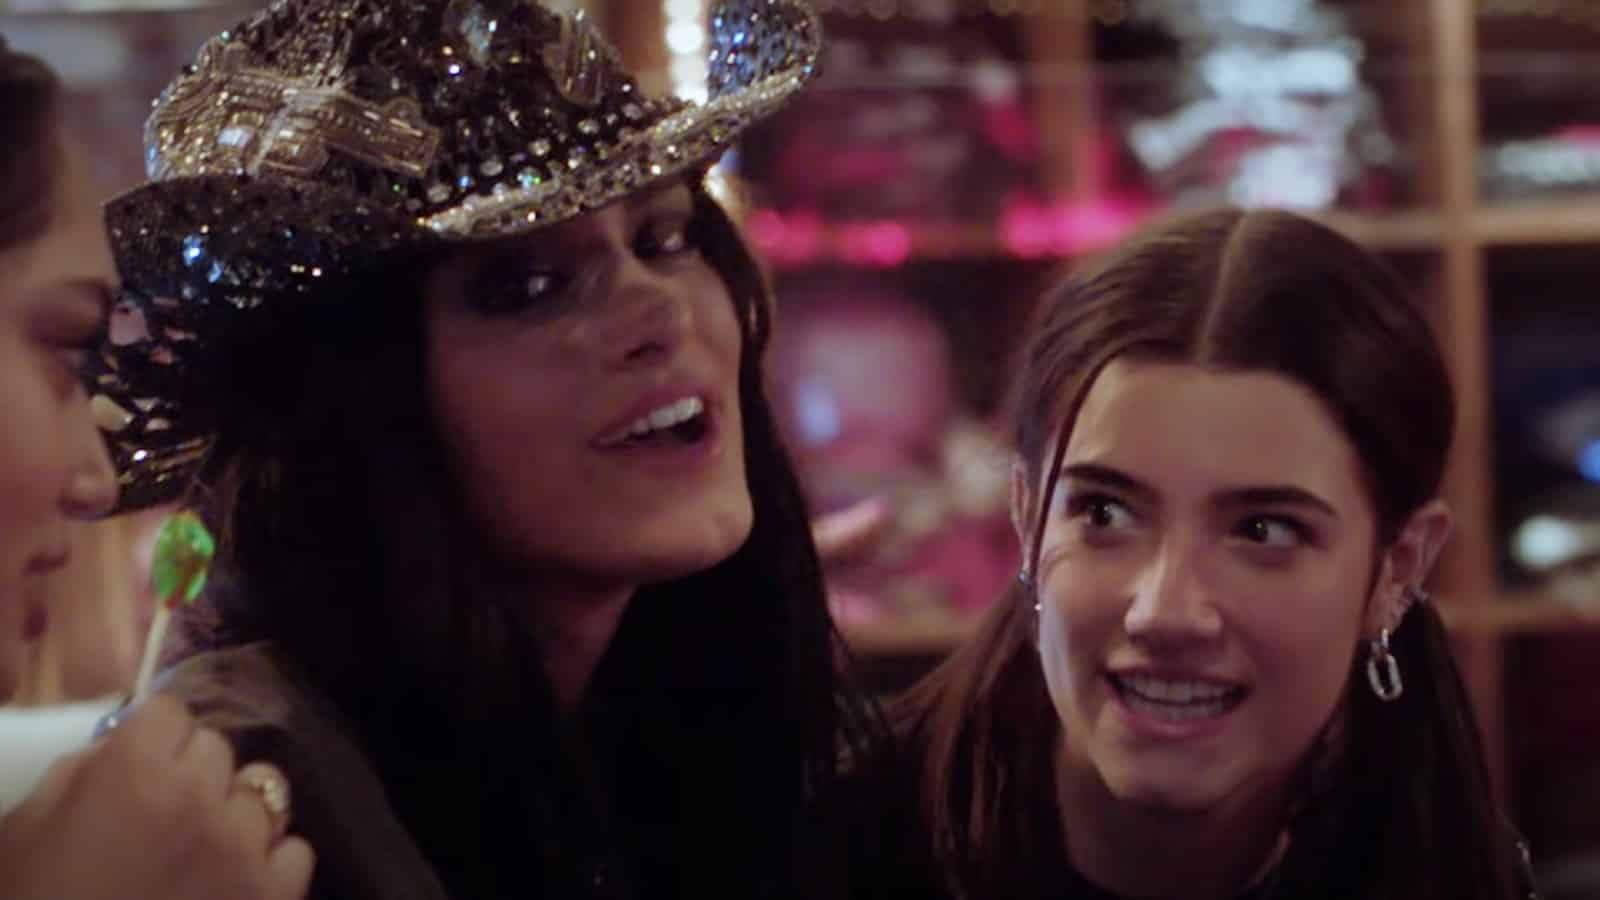 Dixie and Charli D'Amelio appear in Dixie's music video